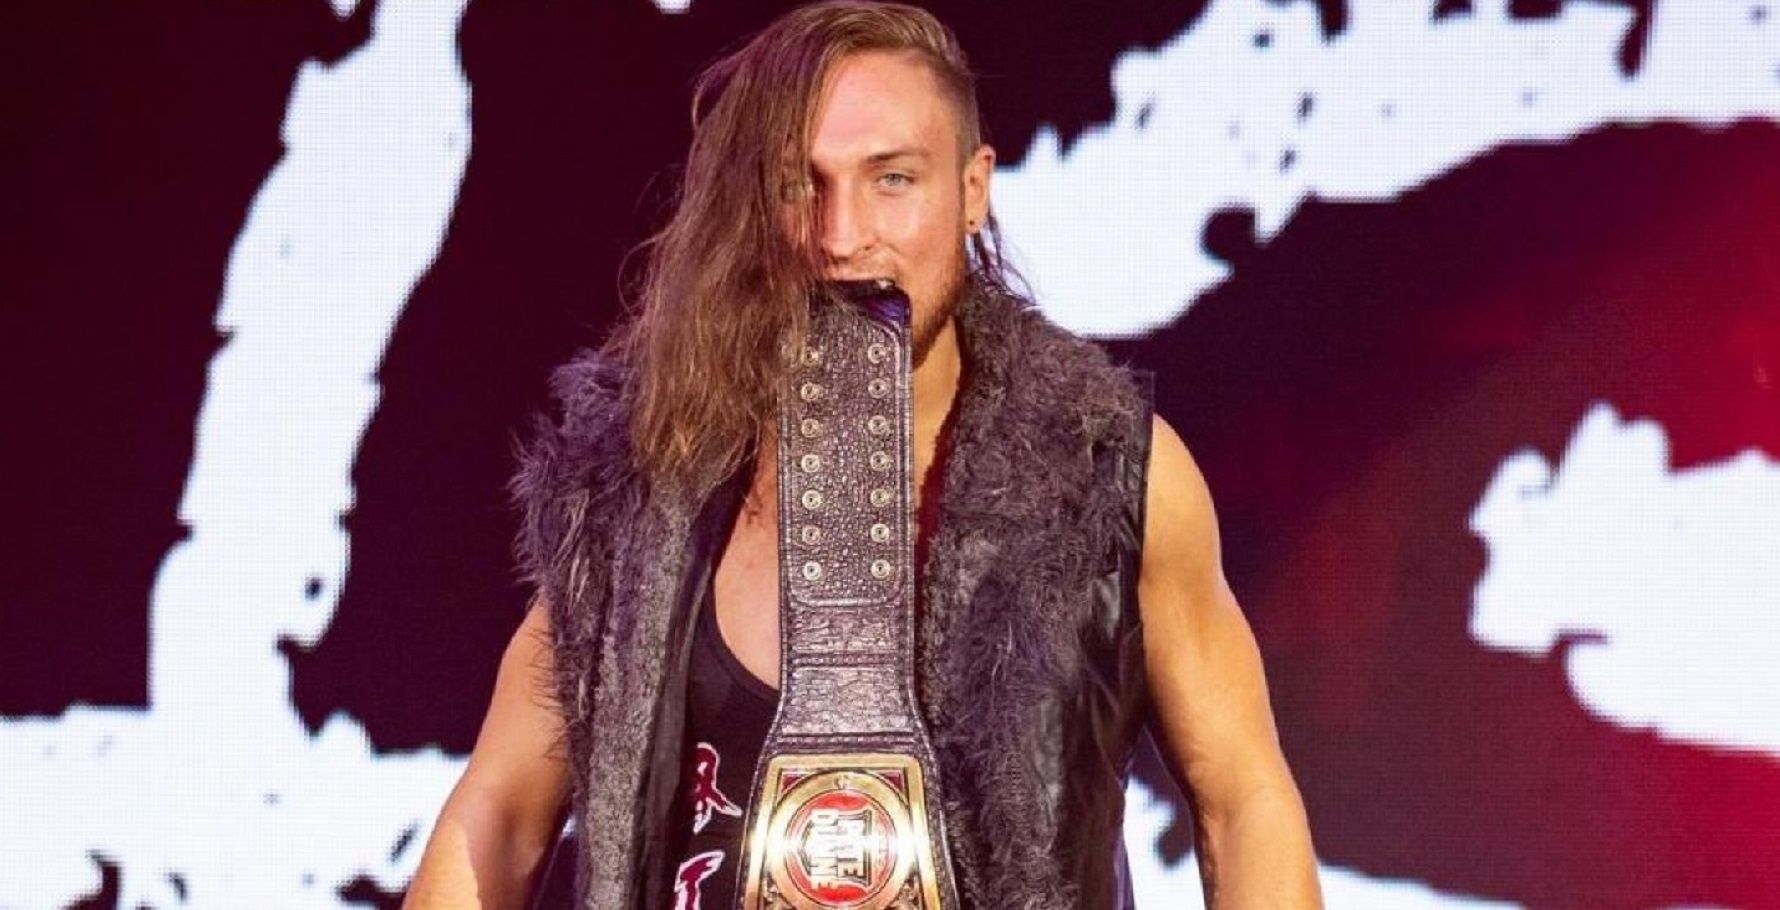 https://static2.thesportsterimages.com/wordpress/wp-content/uploads/2019/09/pete-dunne-1.jpg